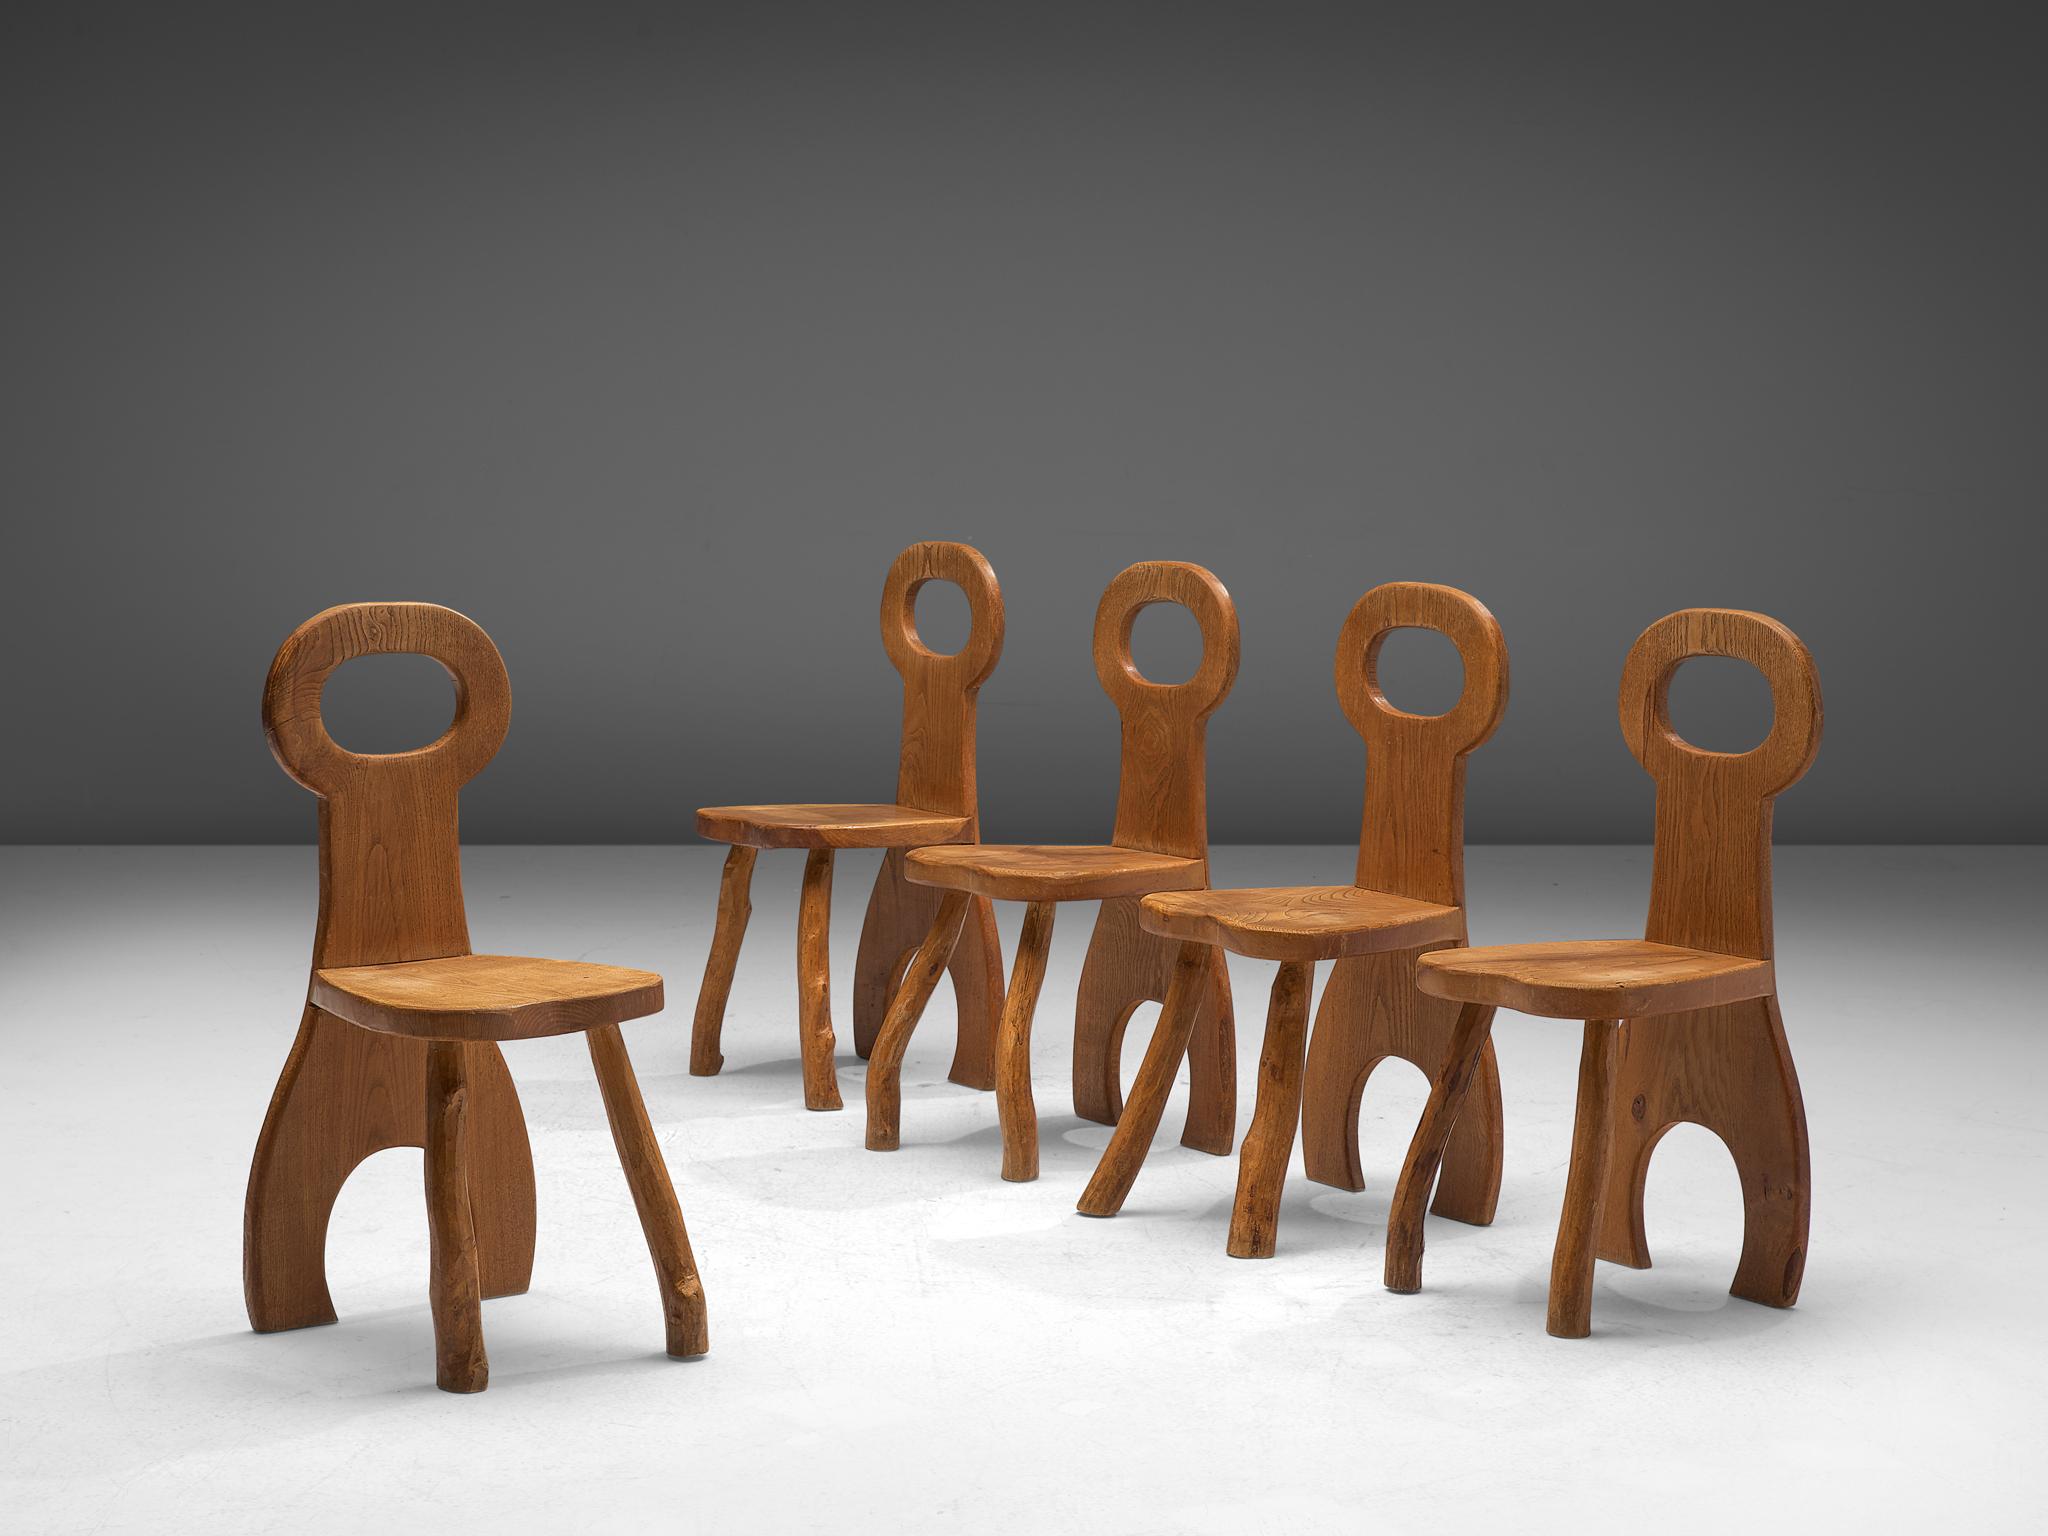 Set of five dining chairs, oak, France, 1960s.

Oak wooden chairs that has robust design with organic elements. The bulky seats are made of beautiful oak wood that developed a nice, rustic patina over the years. The design features a bulky and